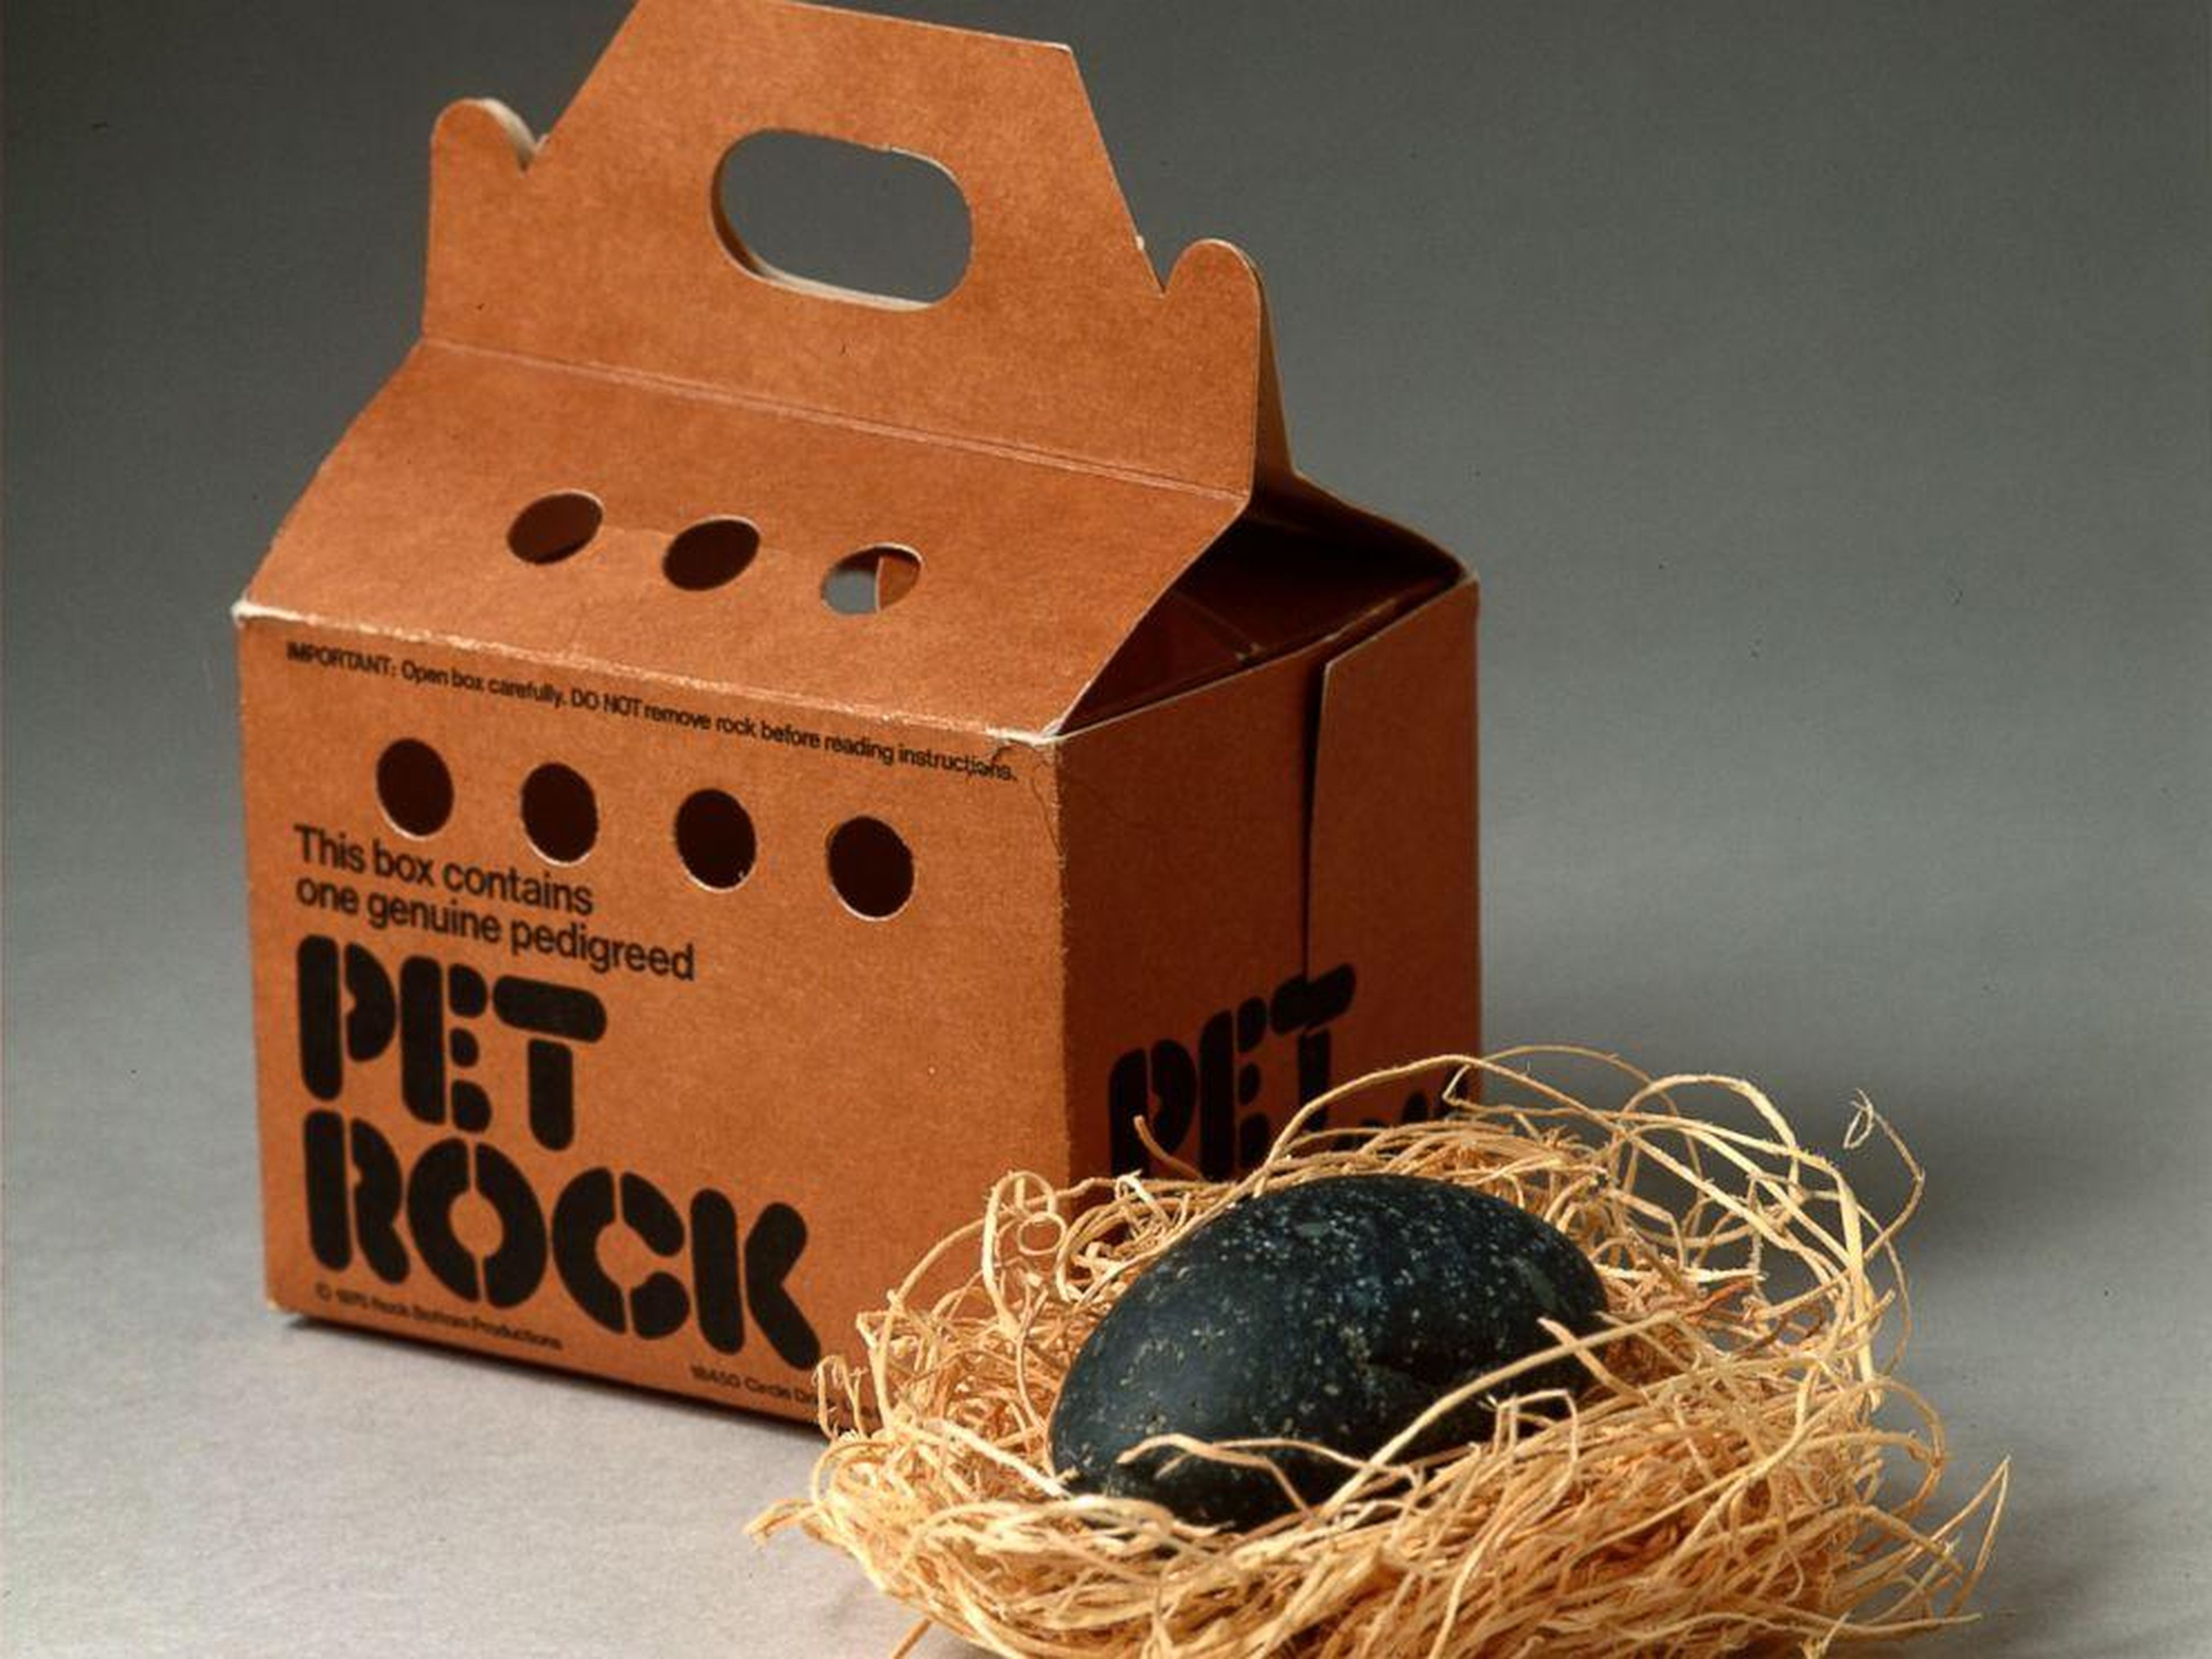 Gary Dahl, an advertising executive, was known to joke. After listening to his friends talk about the perils of caring for a pet, he created the Pet Rock in 1975, putting nearly $6 million in his pocket.